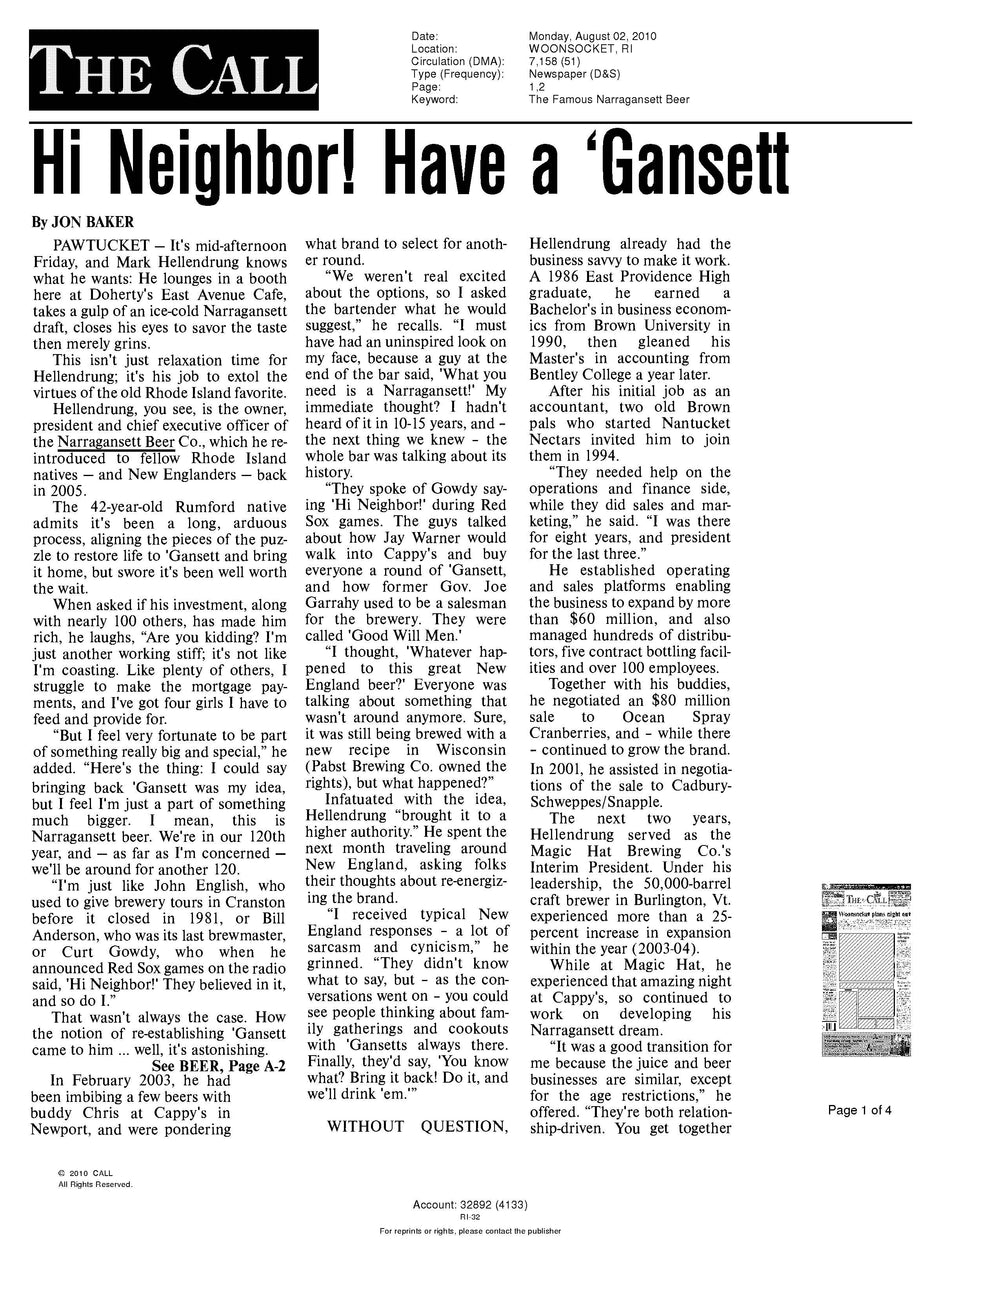 In The News: Woonsocket Call - August 2, 2010